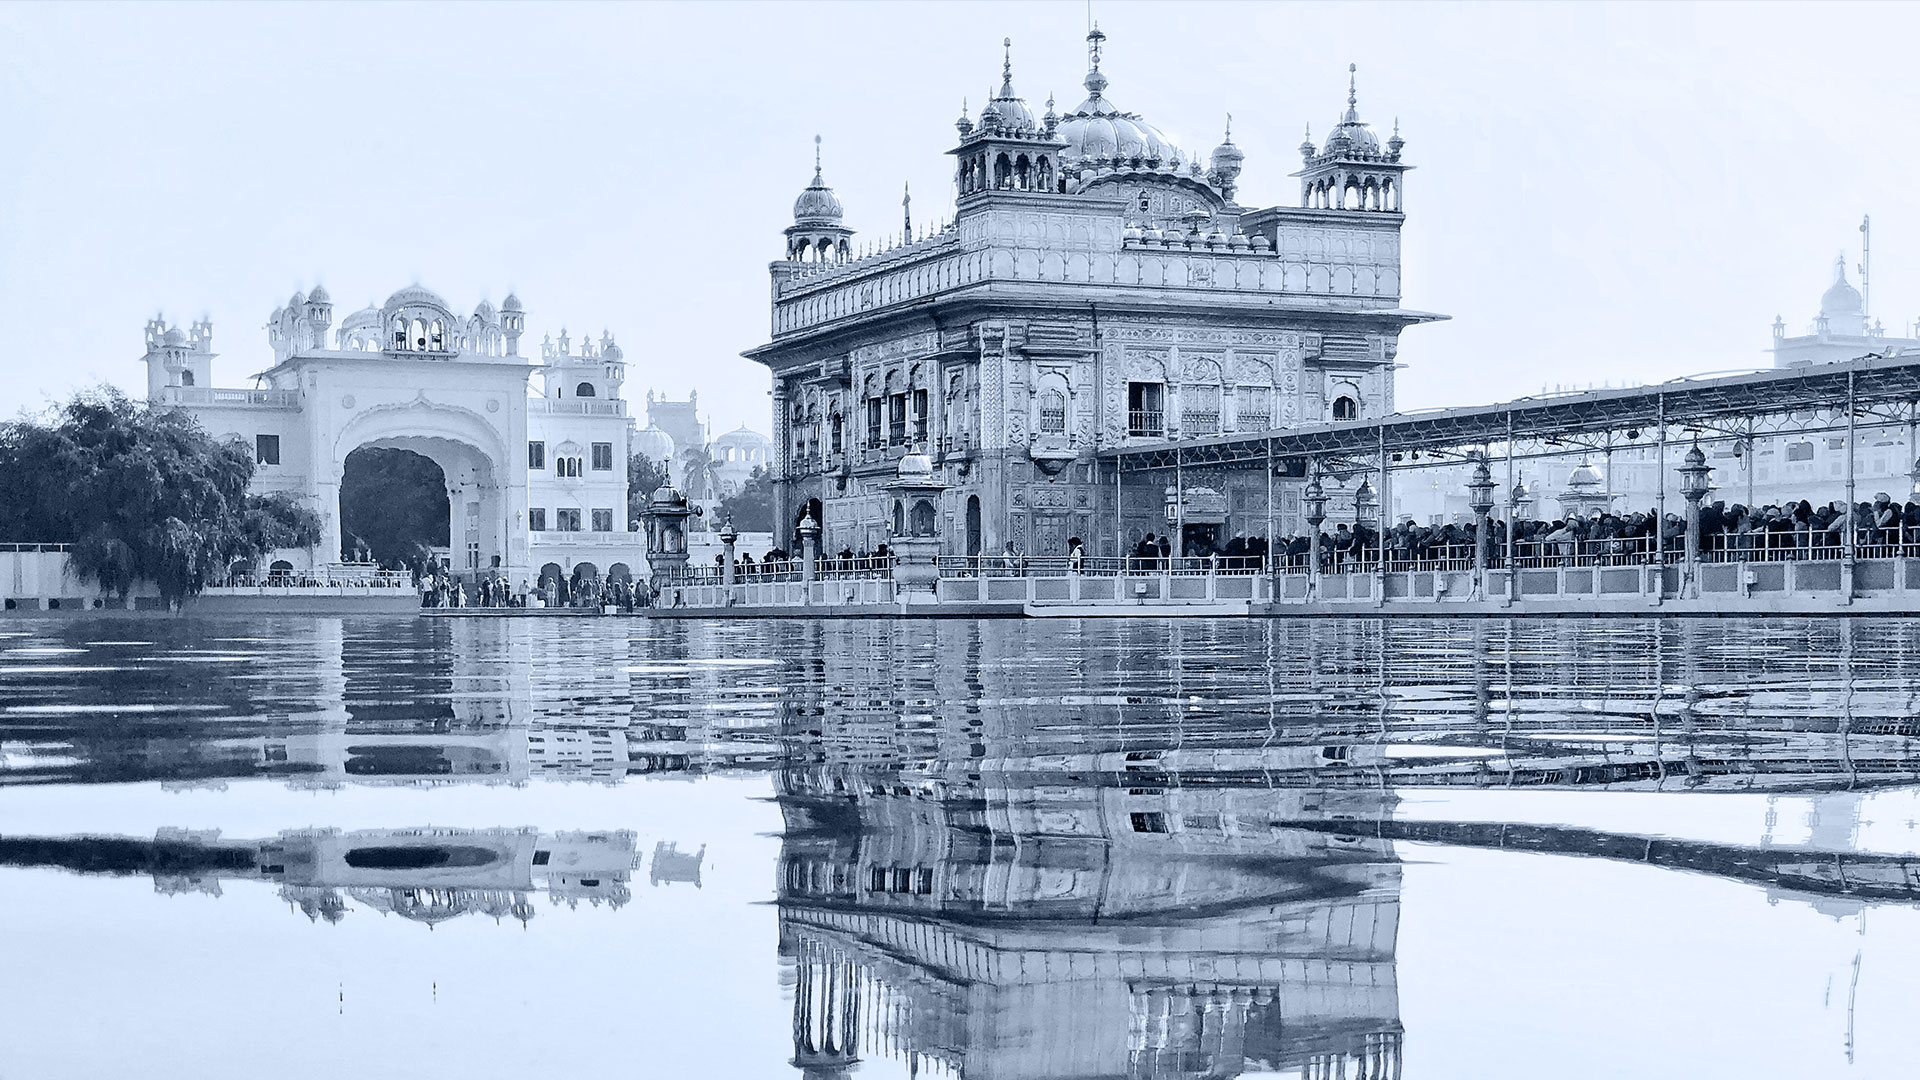 Indian architecture by the water.